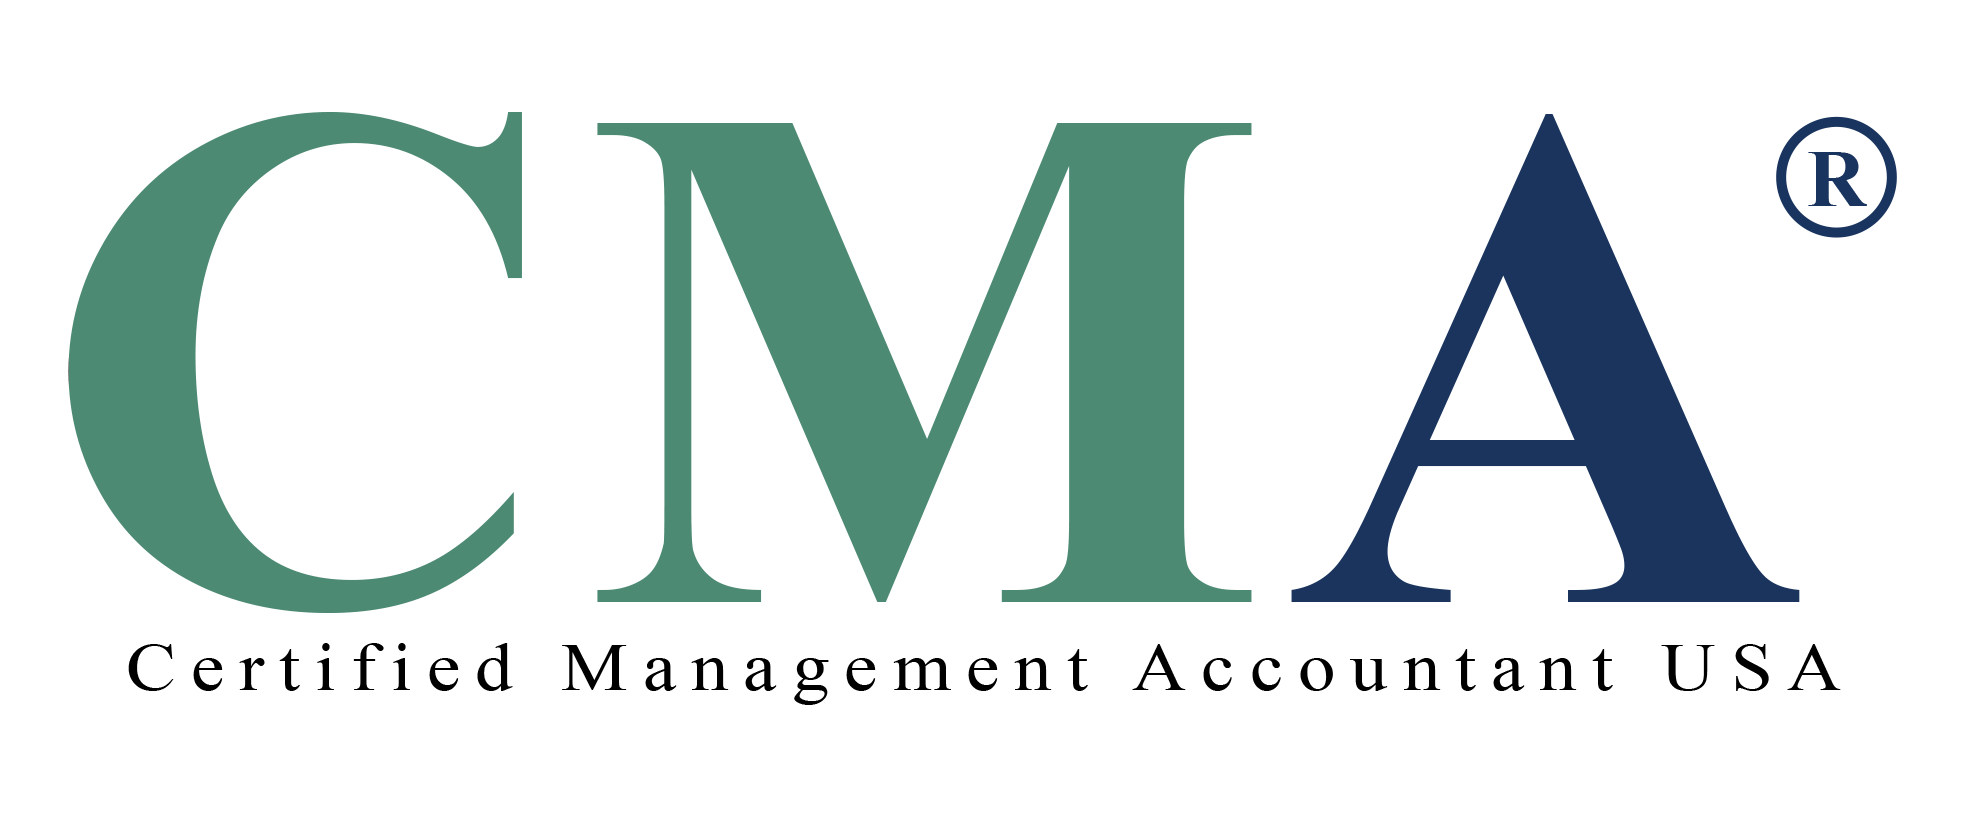 Certified Management Accountant - USA